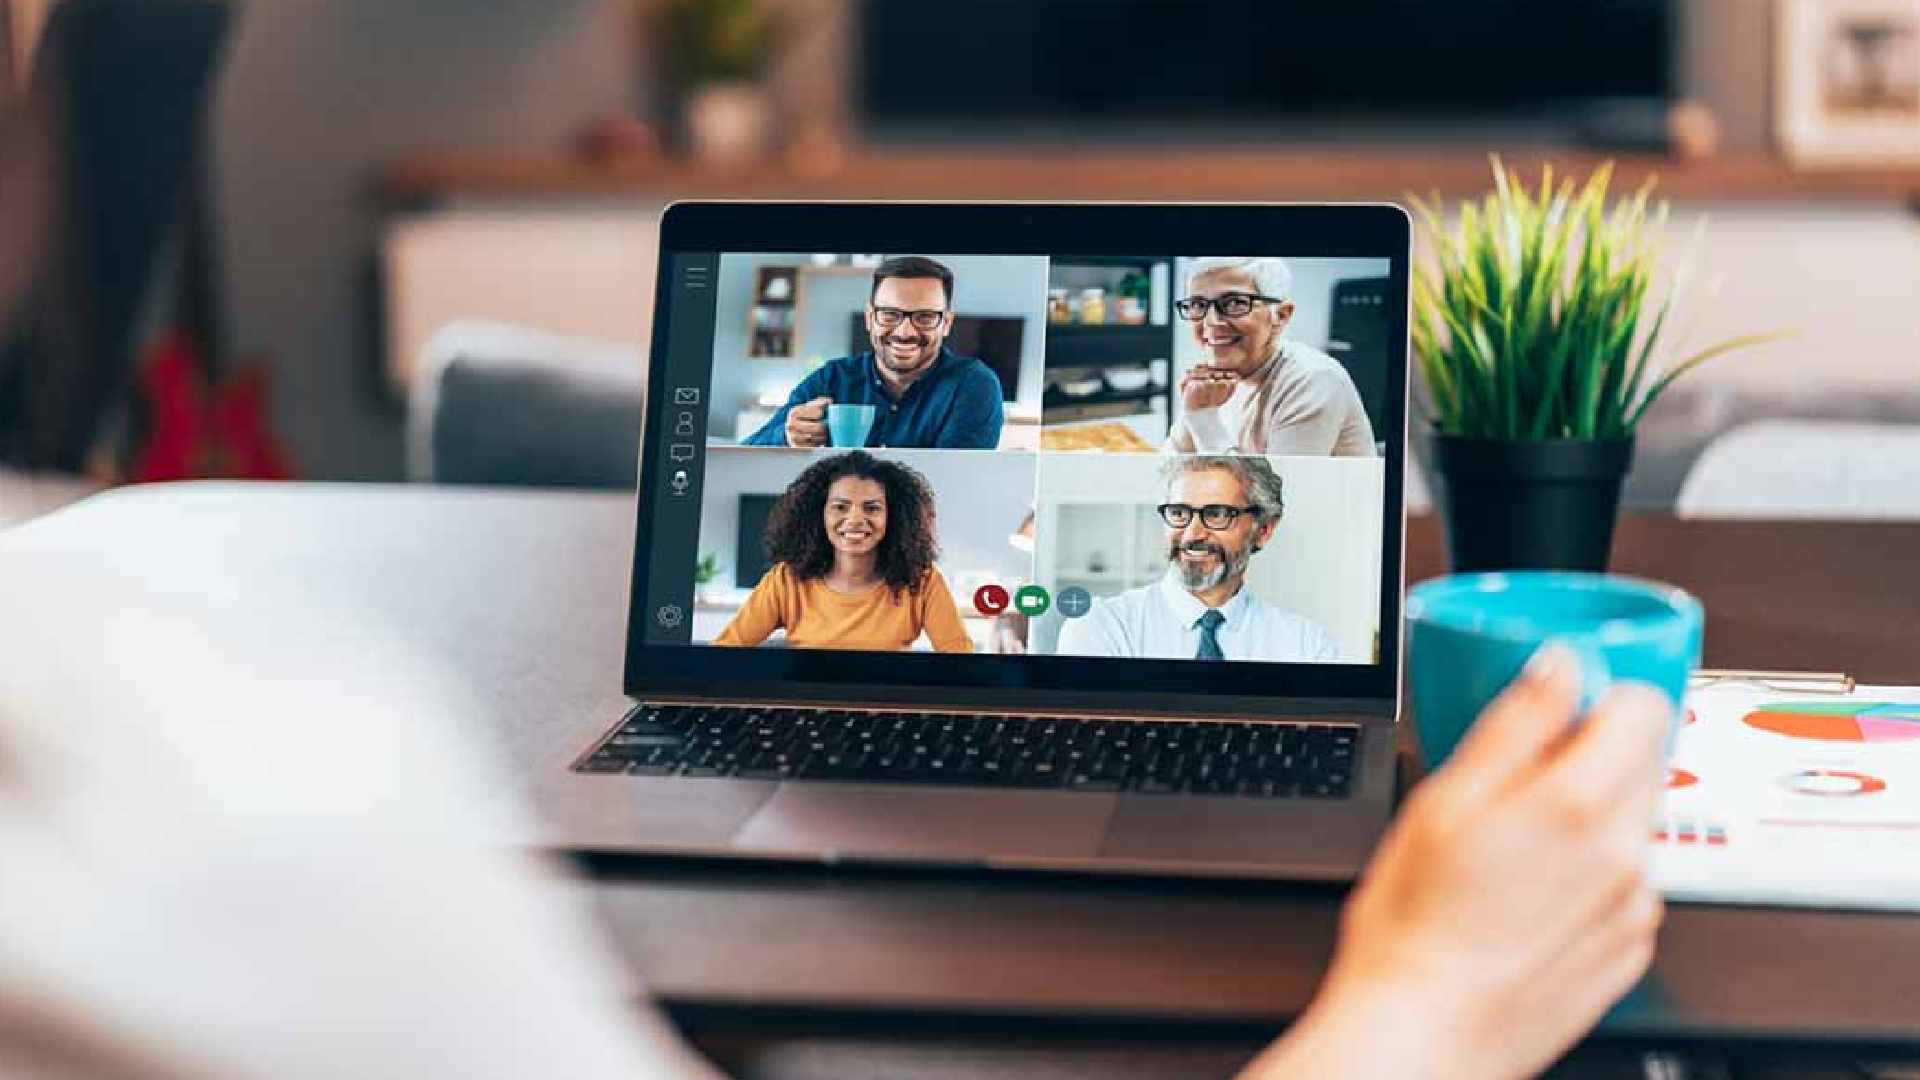 empowering remote employees